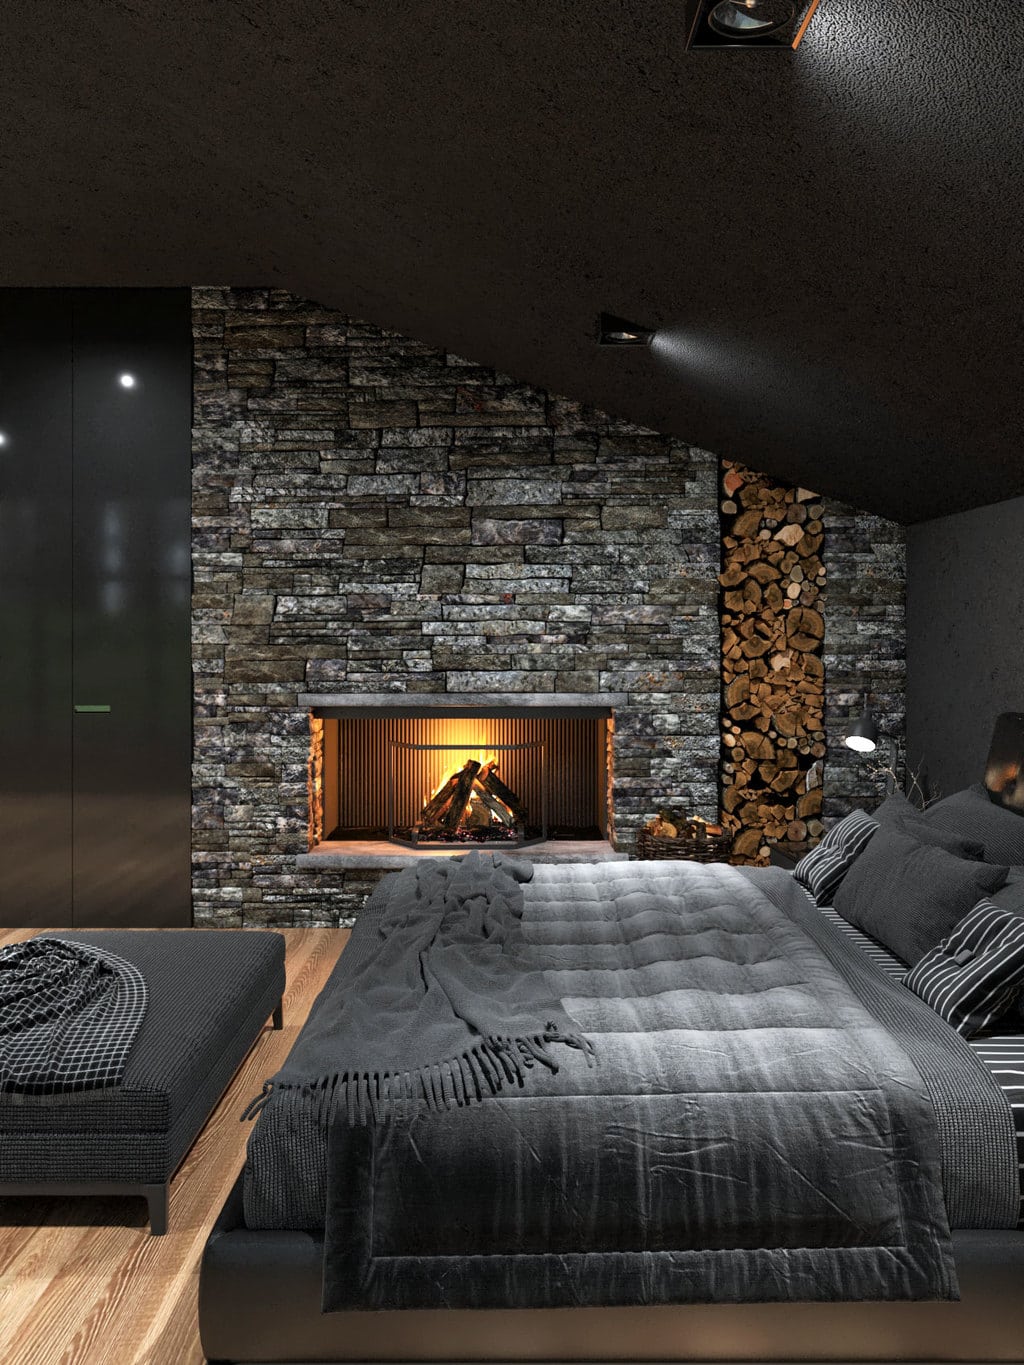 Black villa bedroom with fireplace